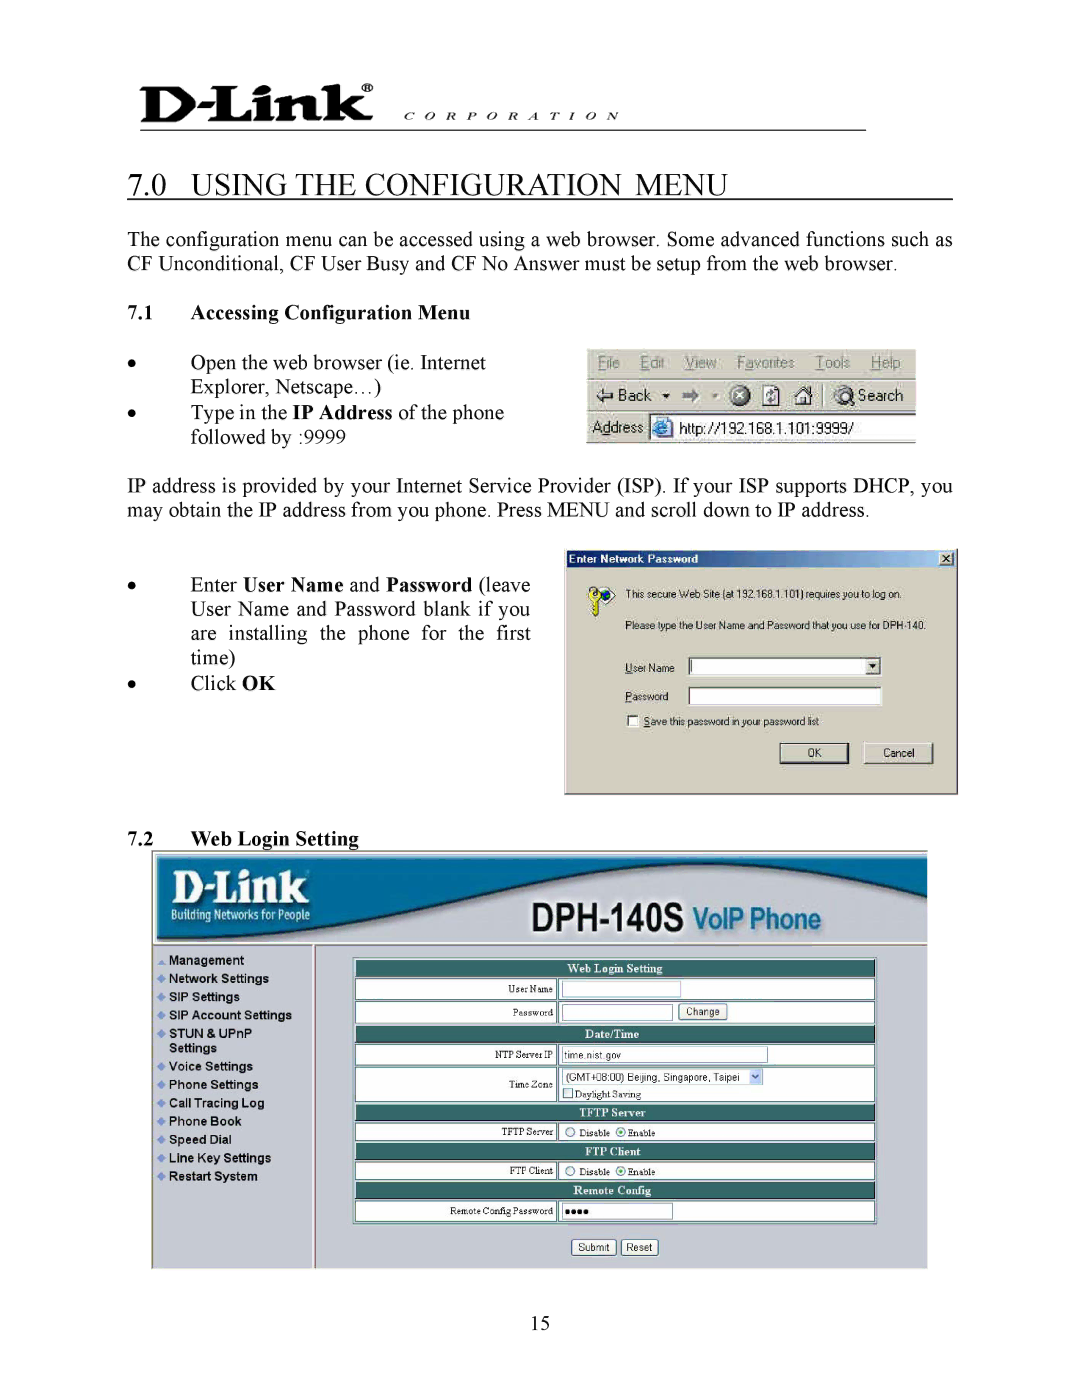 D-Link DPH-140S manual Using the Configuration Menu, Accessing Configuration Menu, Web Login Setting 